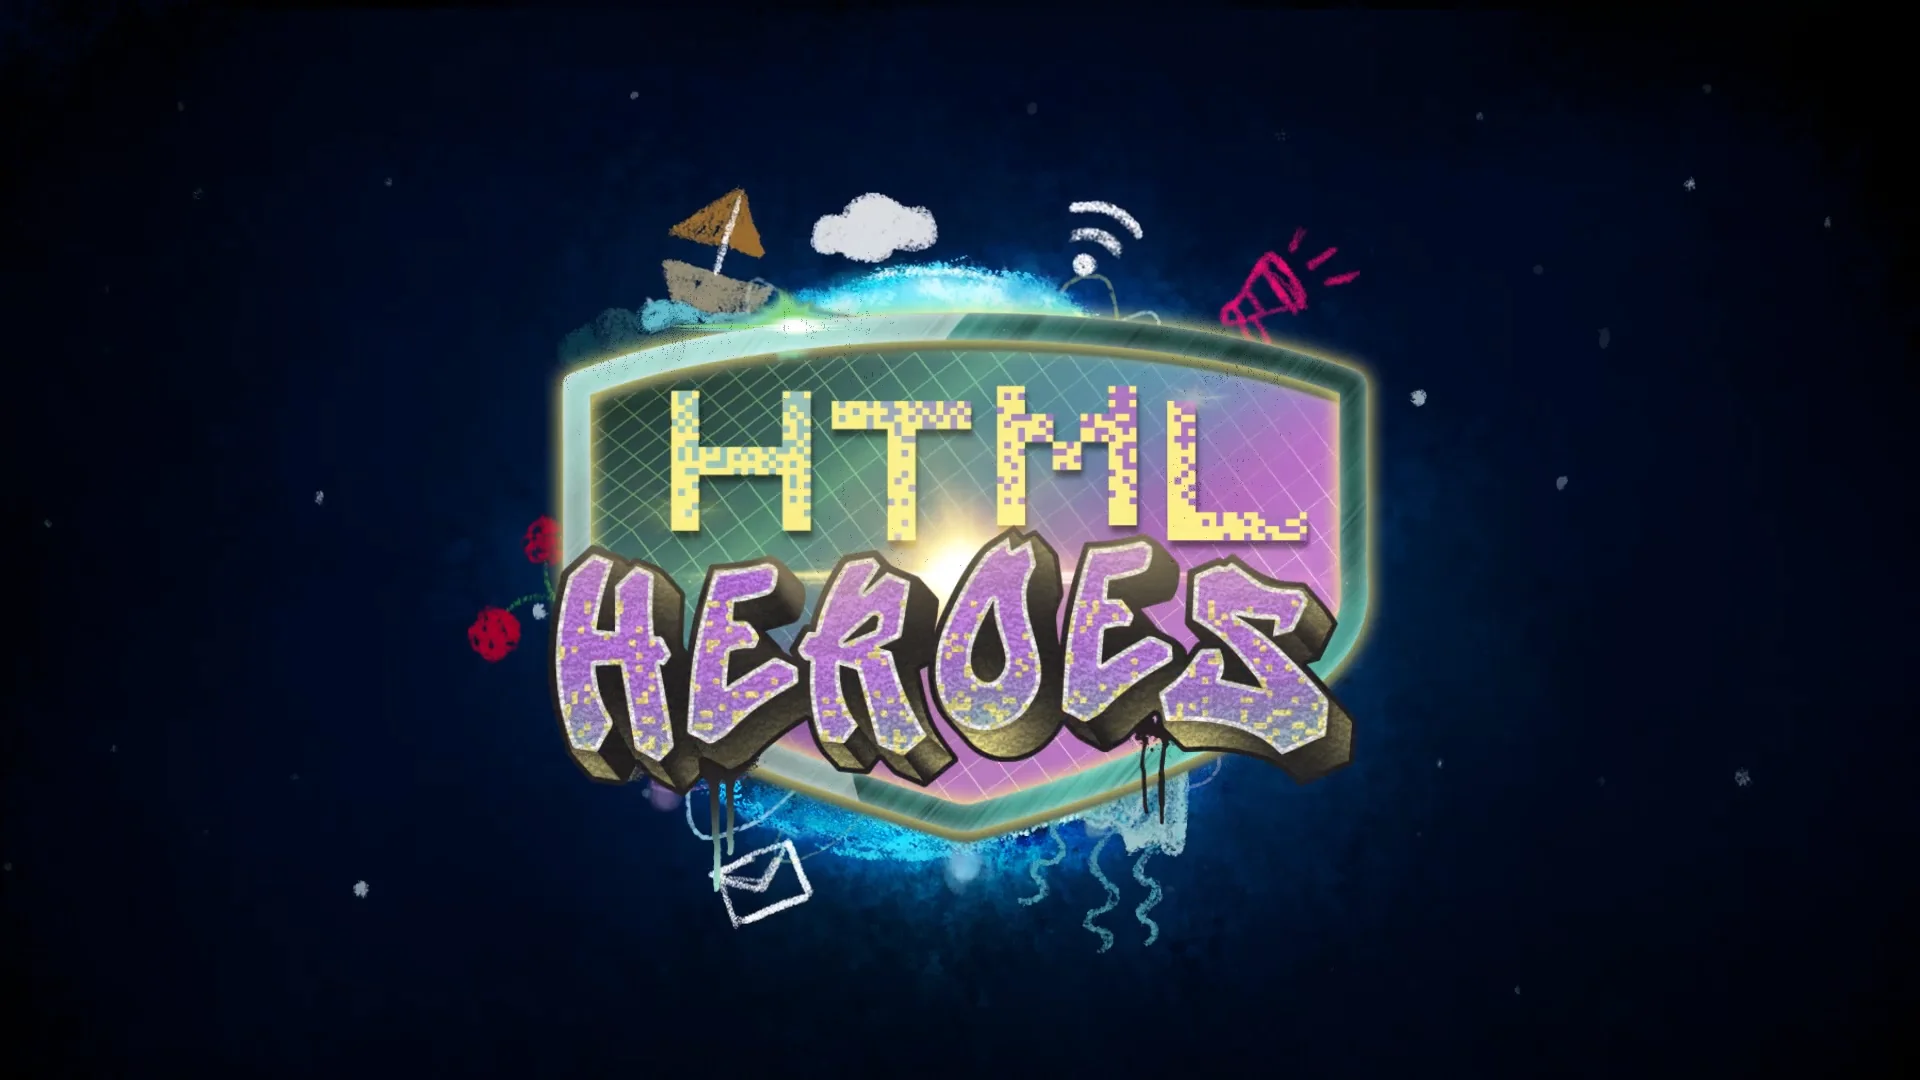 1st and 2nd HTML Heroes Class Programme – HTML Heroes